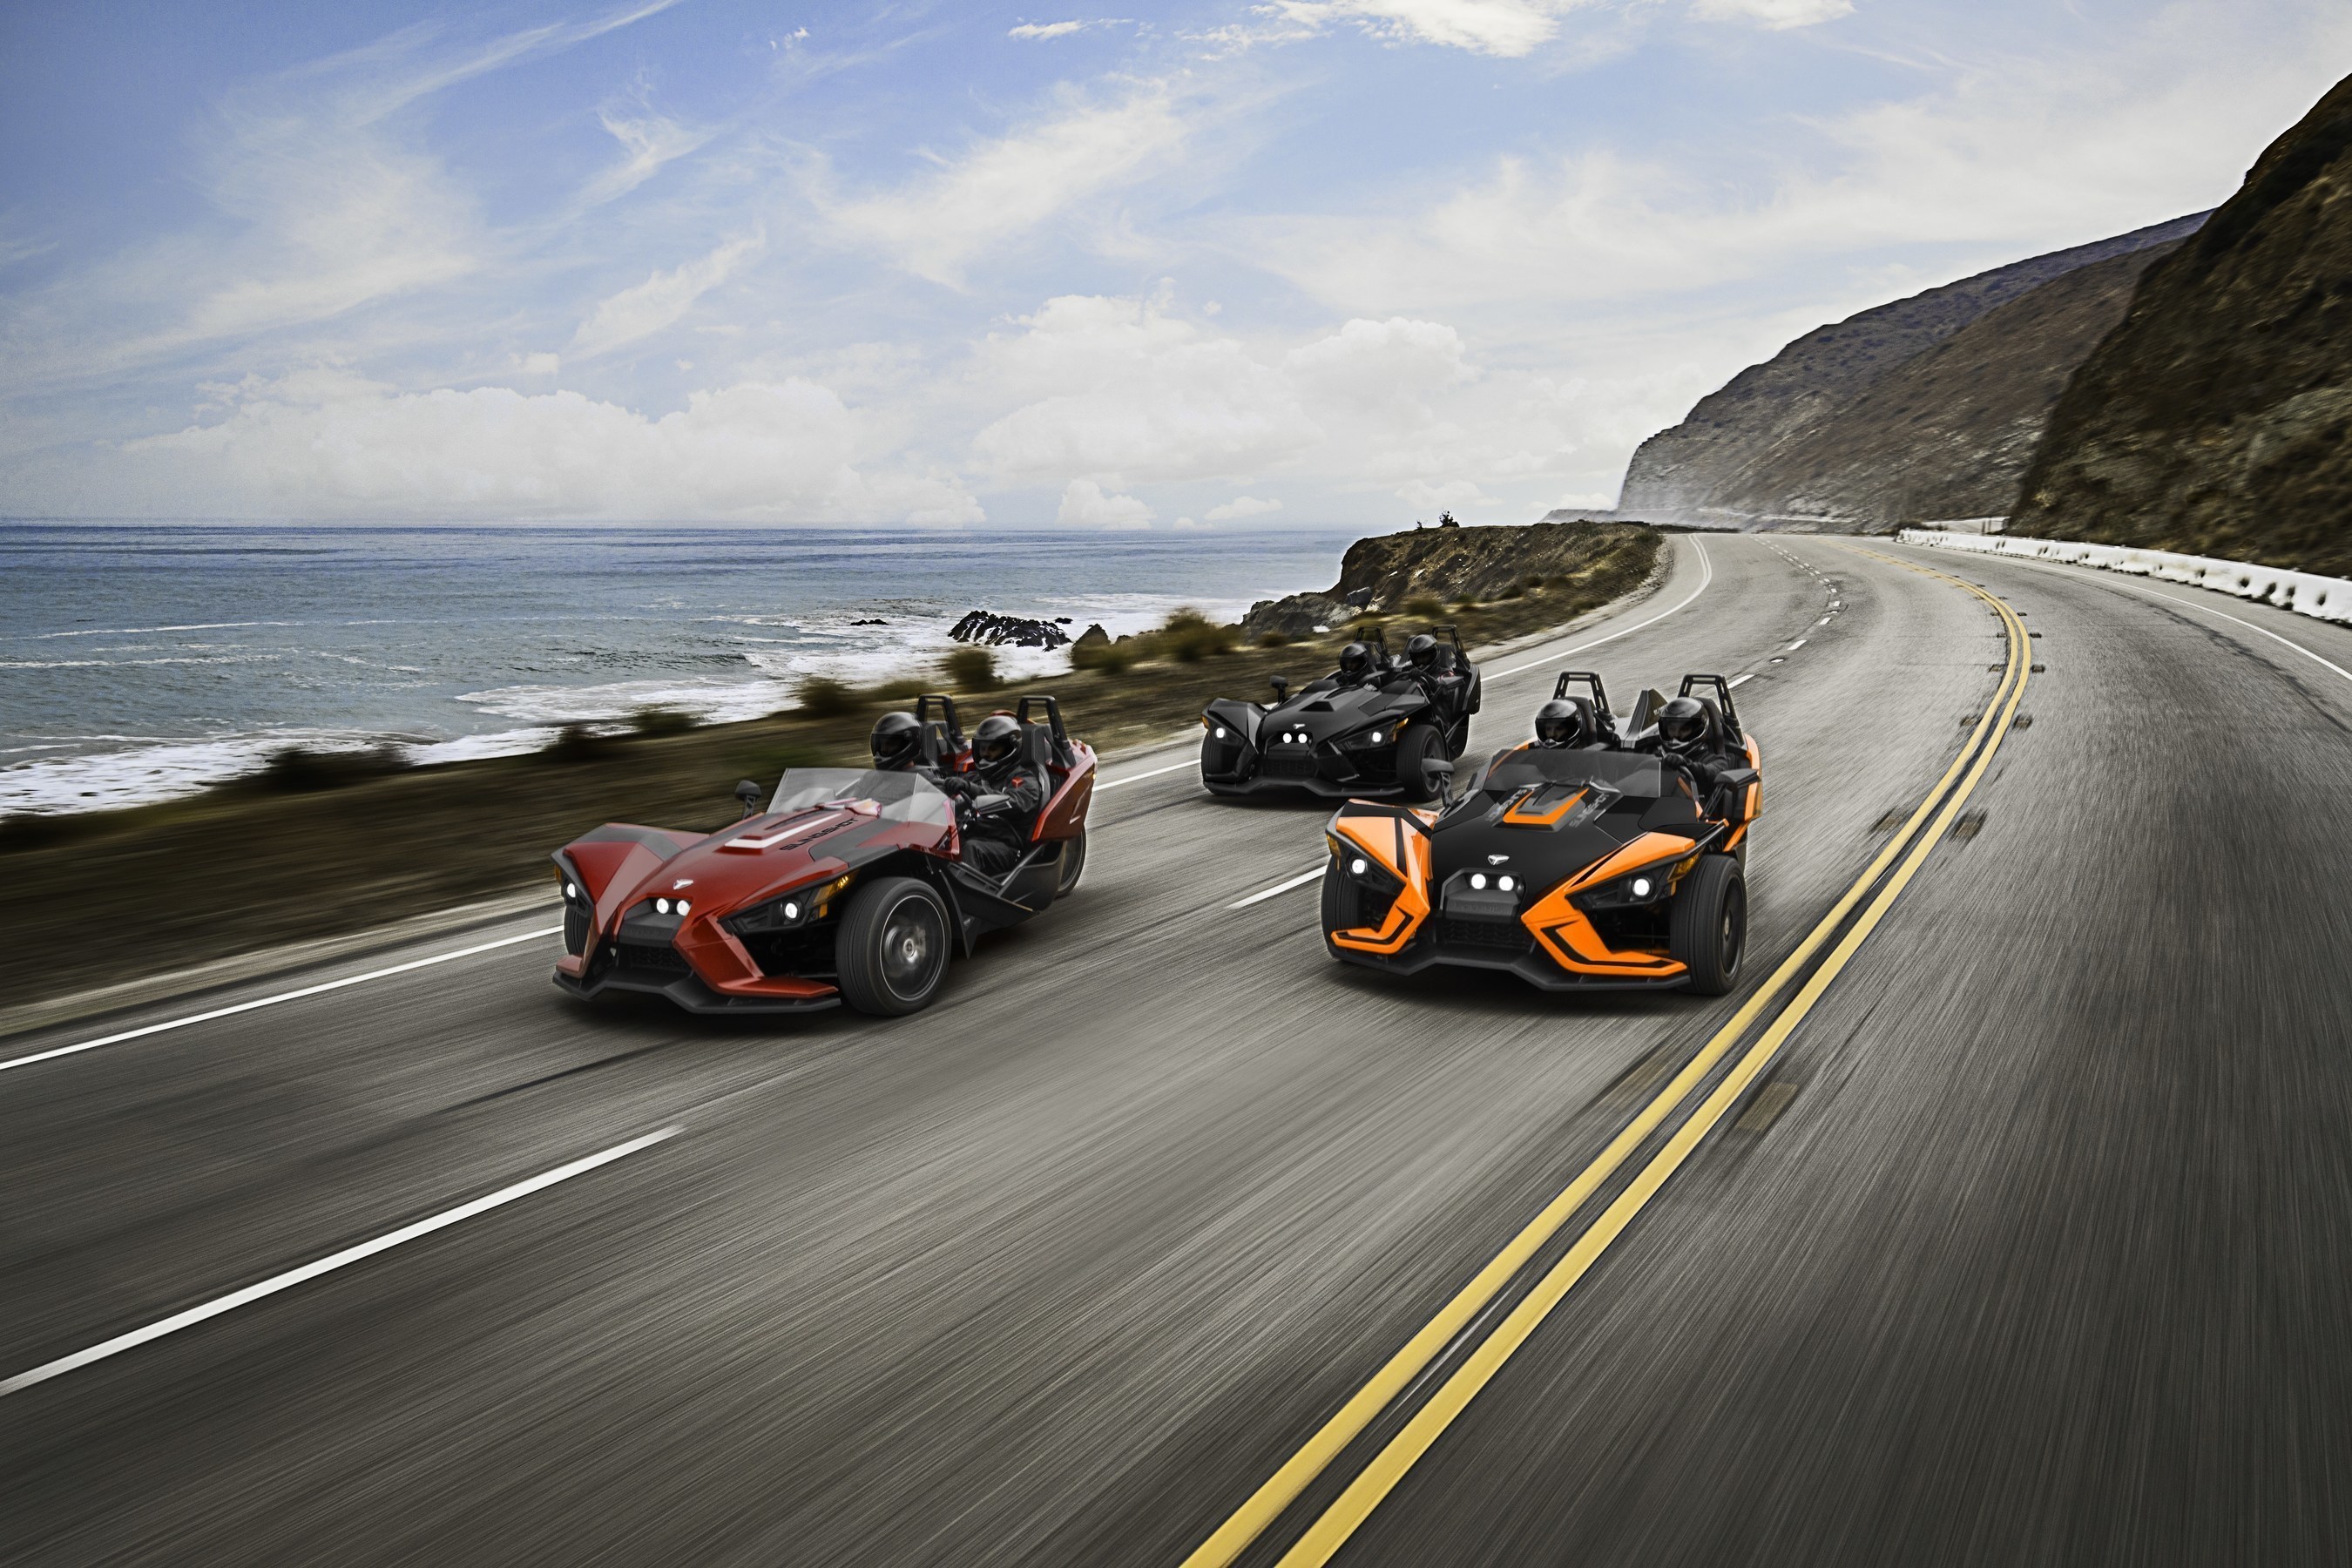 The 2017 Polaris Slingshot SL model features a clear Ripper Series wind deflector, new accent hood graphics, cut-and-sew seats and a premium Rockford Fosgate speaker system, in addition to the currently available standard SL features. The Slingshot SLR builds on the Slingshot's strong foundation with full-body graphics, premium forged-aluminum wheels, an interior LED lighting kit and more.